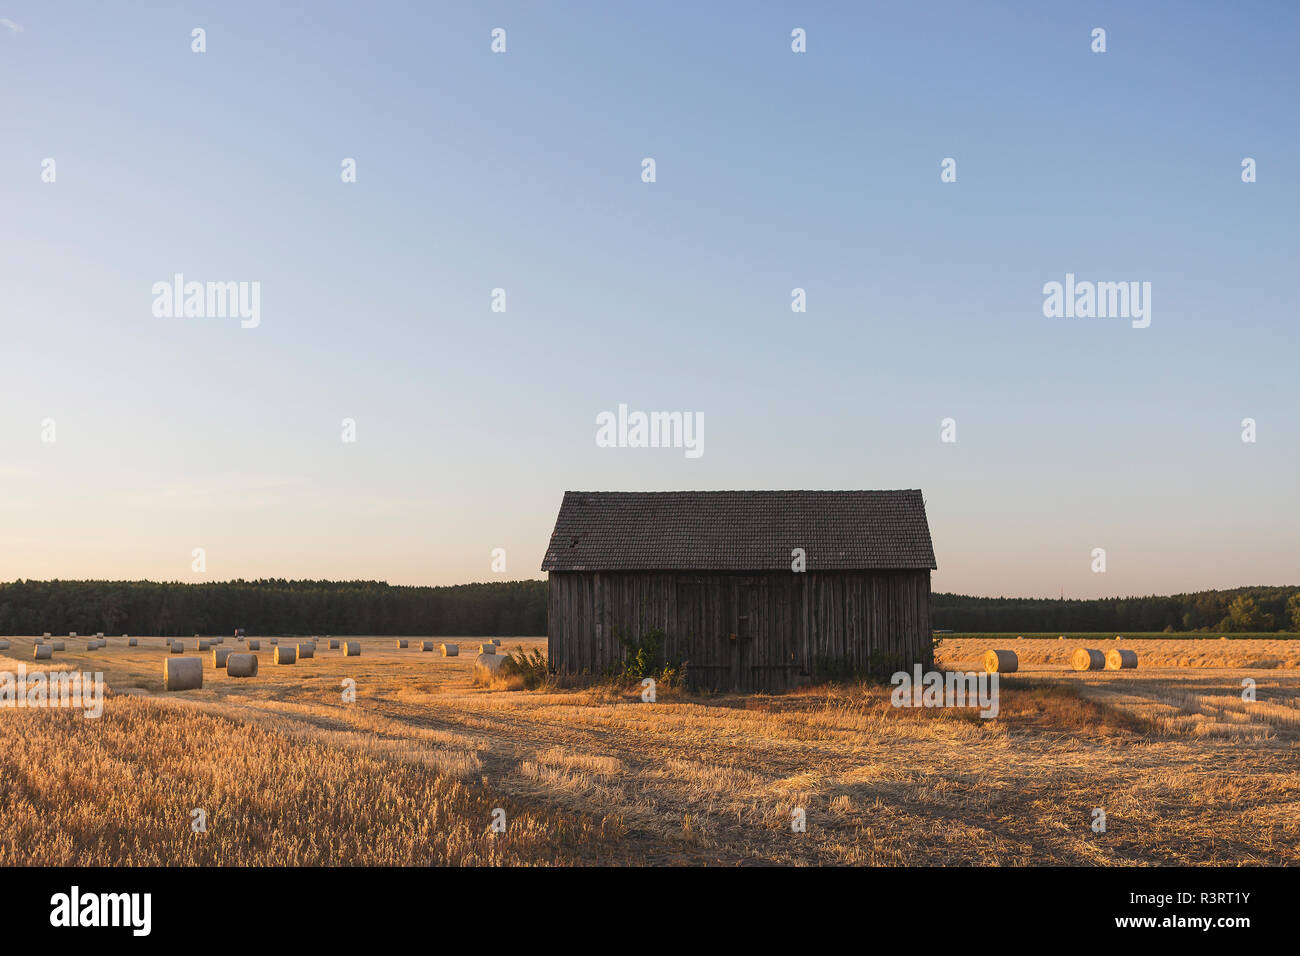 Barn on a field at harvesttime in the evening Stock Photo